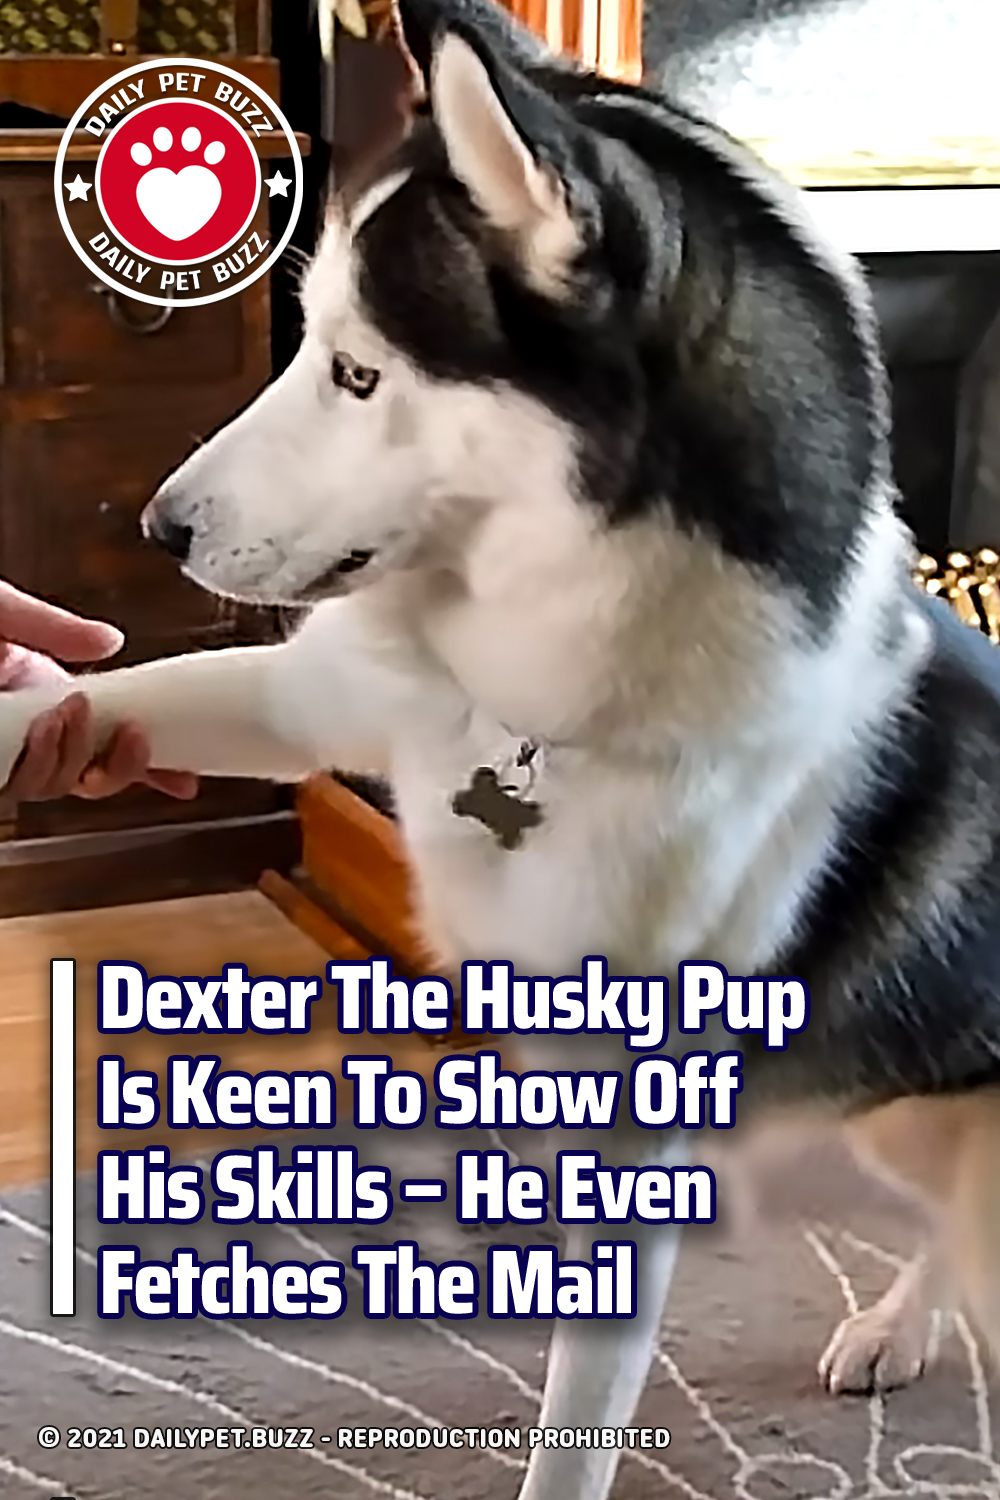 Dexter The Husky Pup Is Keen To Show Off His Skills – He Even Fetches The Mail